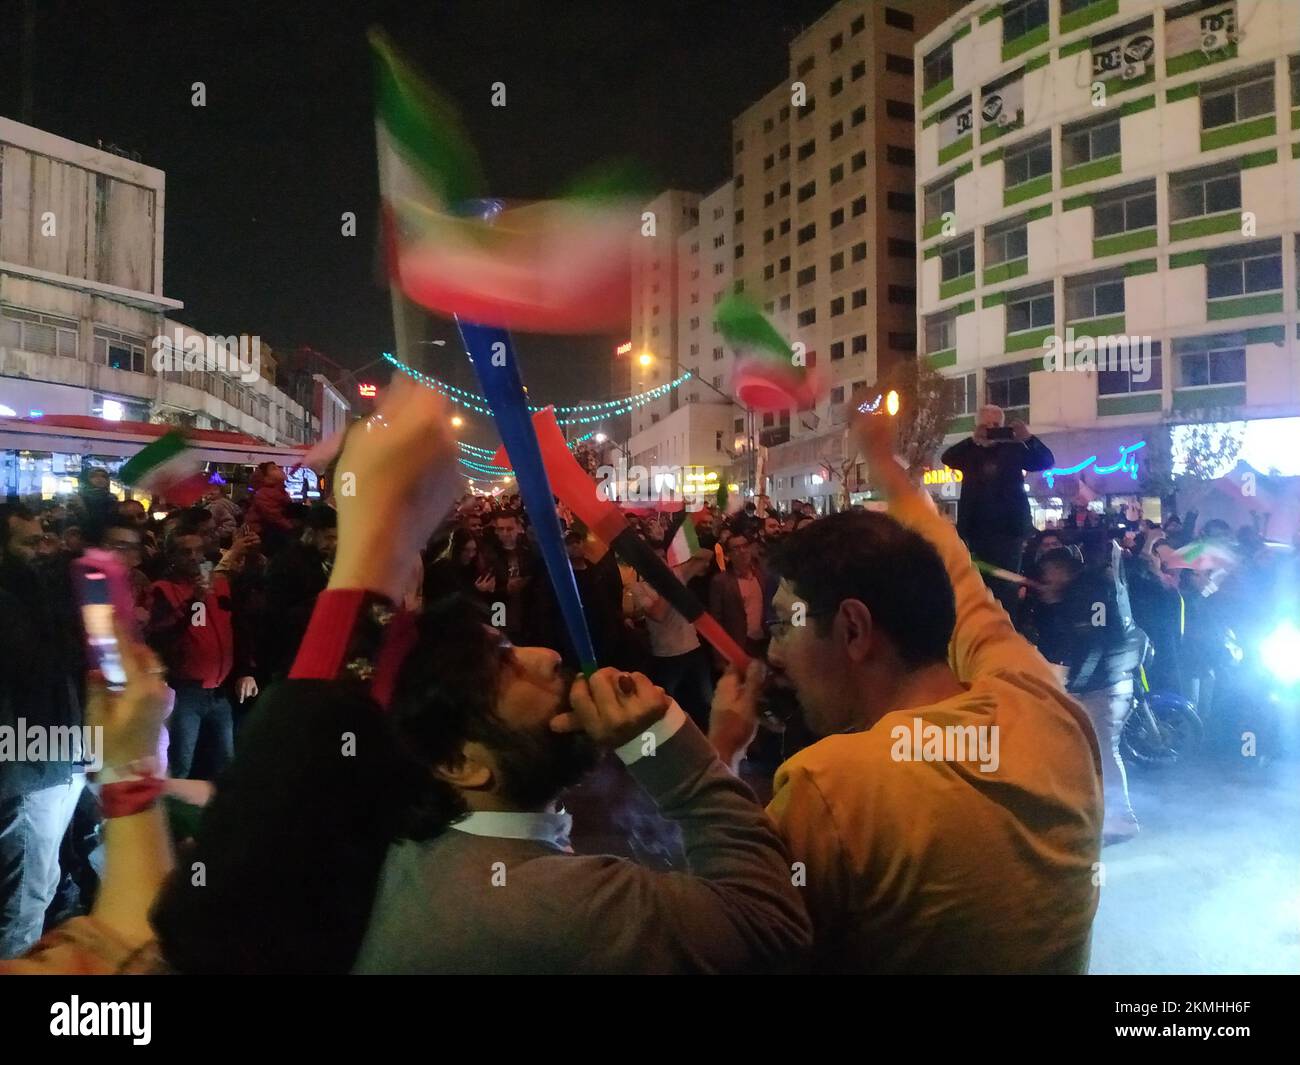 Tehran, Tehran, Iran. 25th Nov, 2022. Iranians celebrate their national soccer team's win against Wales. Iran won 2-0 against Wales during the FIFA 2022 World Cup in Qatar. Iran struck twice in the dying moments of added time to earn a 2-0 win over 10-man Wales in their Group B clash at the World Cup today. Rouzbeh Cheshmi and Ramin Rezaeian scored to give Iran a famous win, which moved them into second place in the group behind England, who face the USA later in the day. (Credit Image: © Stringer via ZUMA Press Wire) Stock Photo